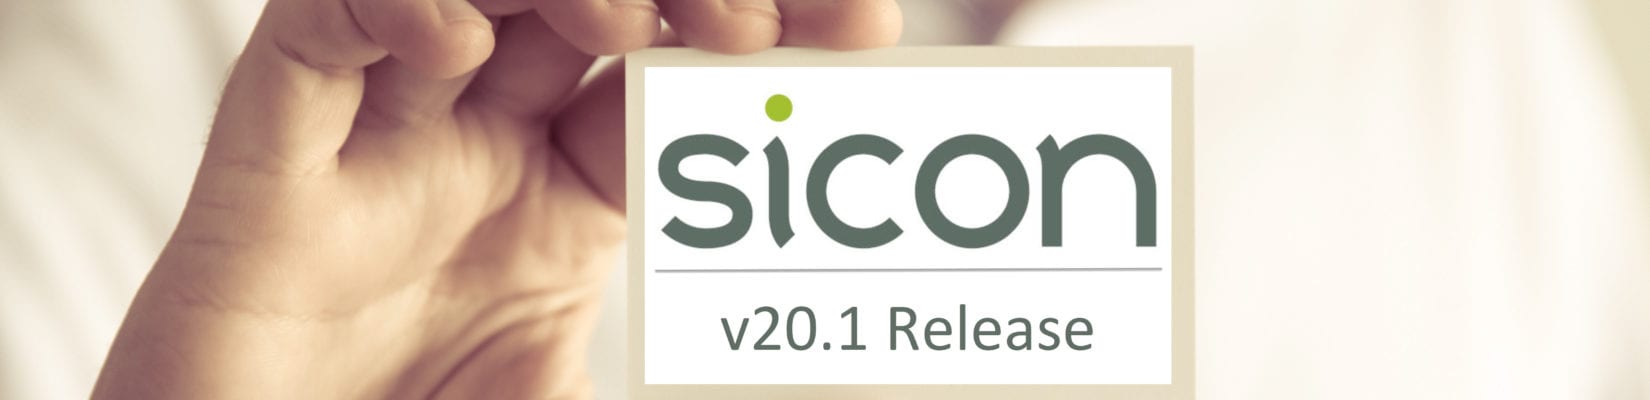 Sicon v20.1 New Features & Important Information